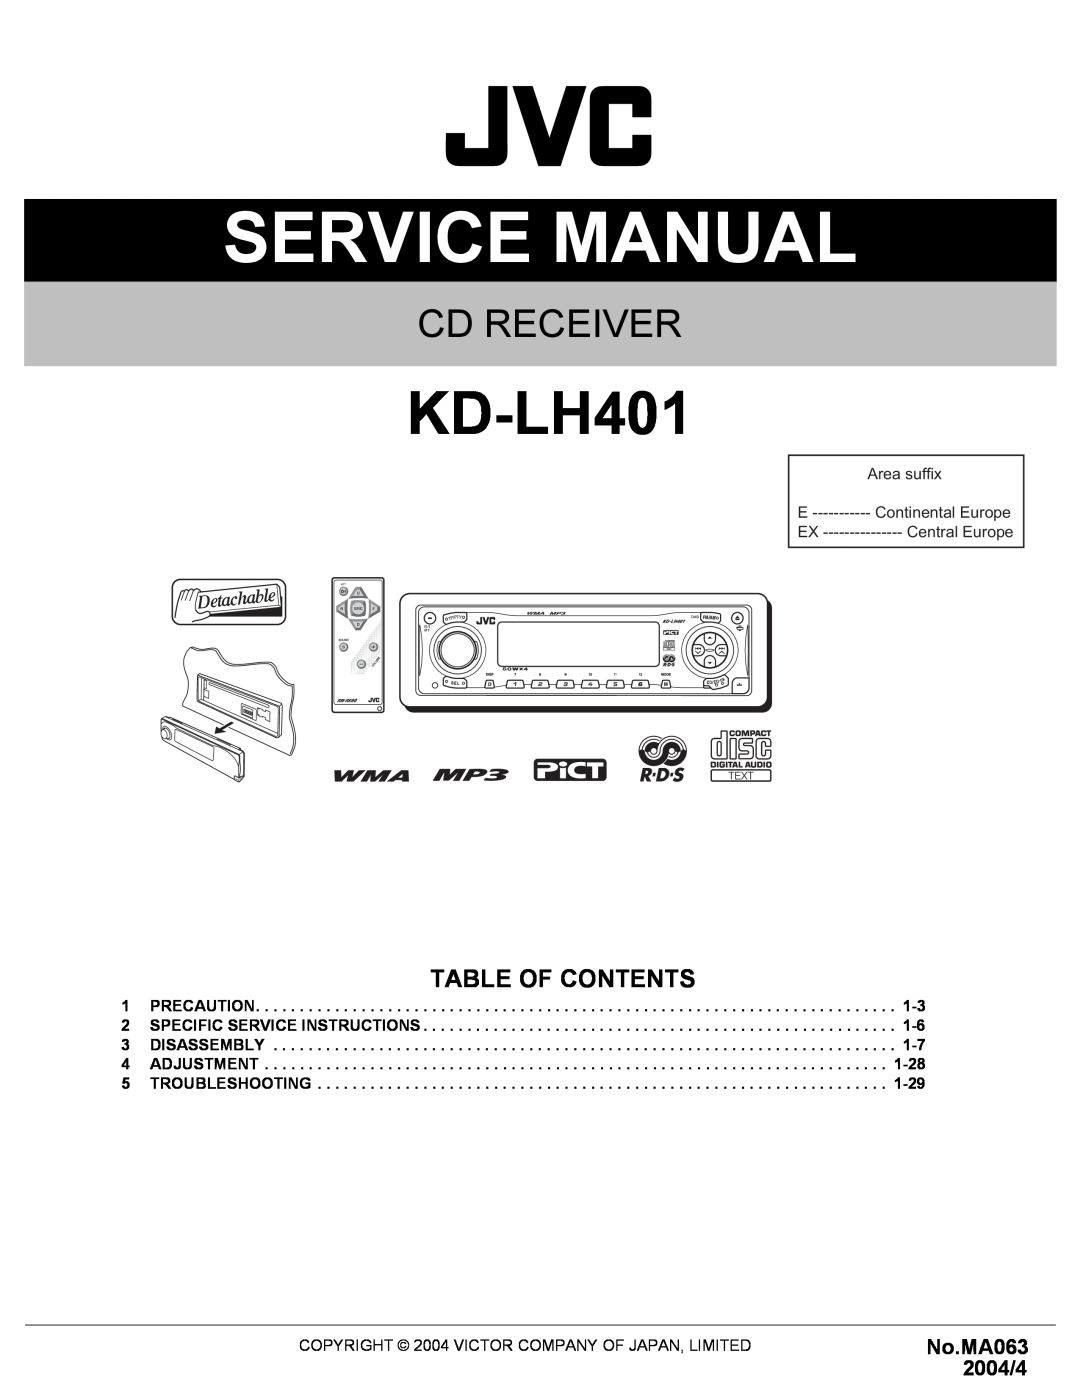 JVC KD-LH401 service manual Table Of Contents, No.MA063 2004/4, Service Manual, Cd Receiver 